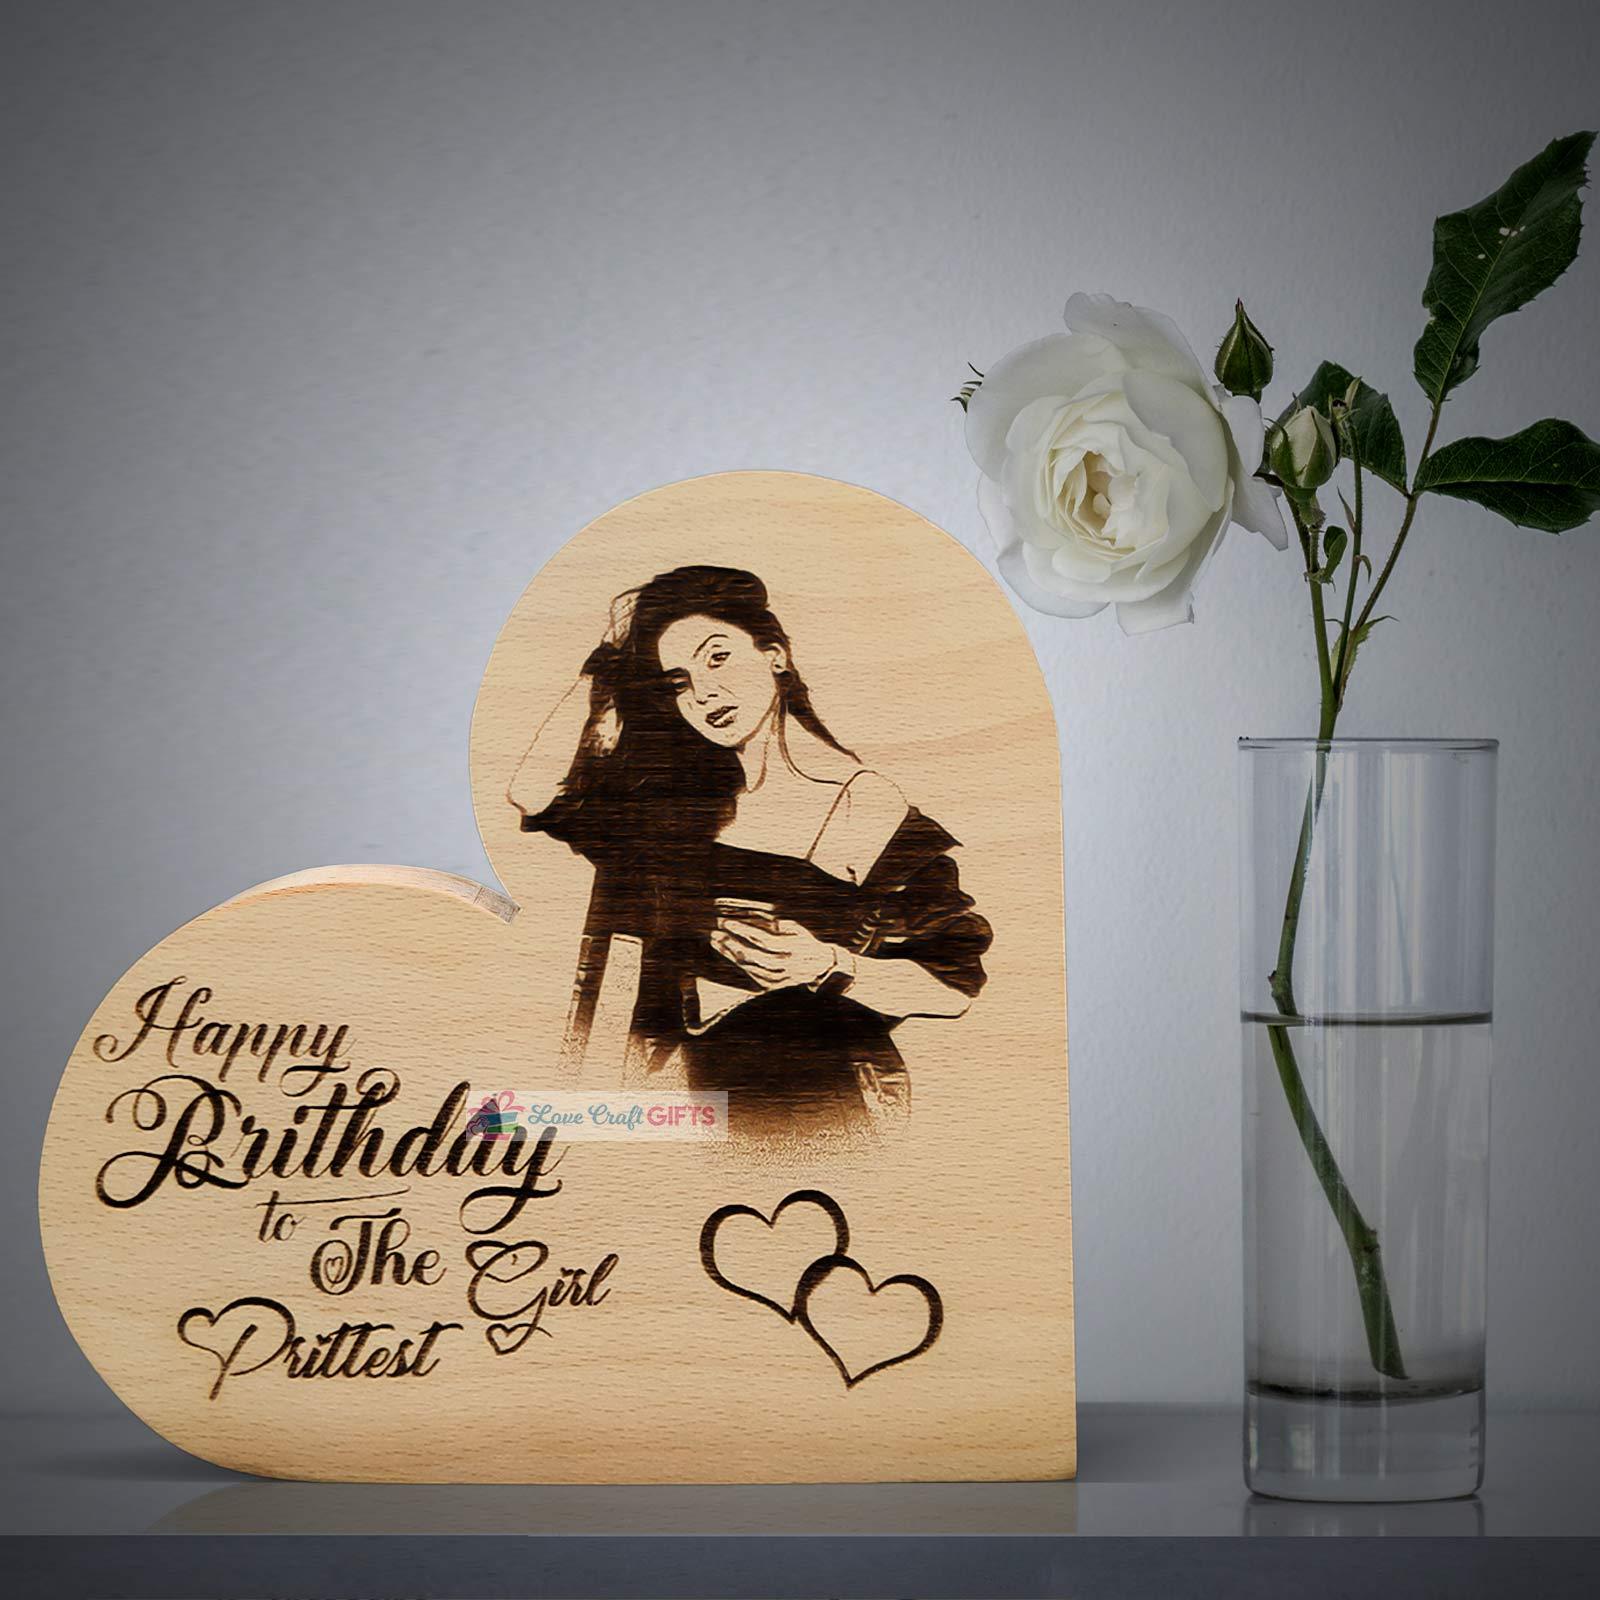 Wooden Gifts - Personalised Wooden Gift Items Online